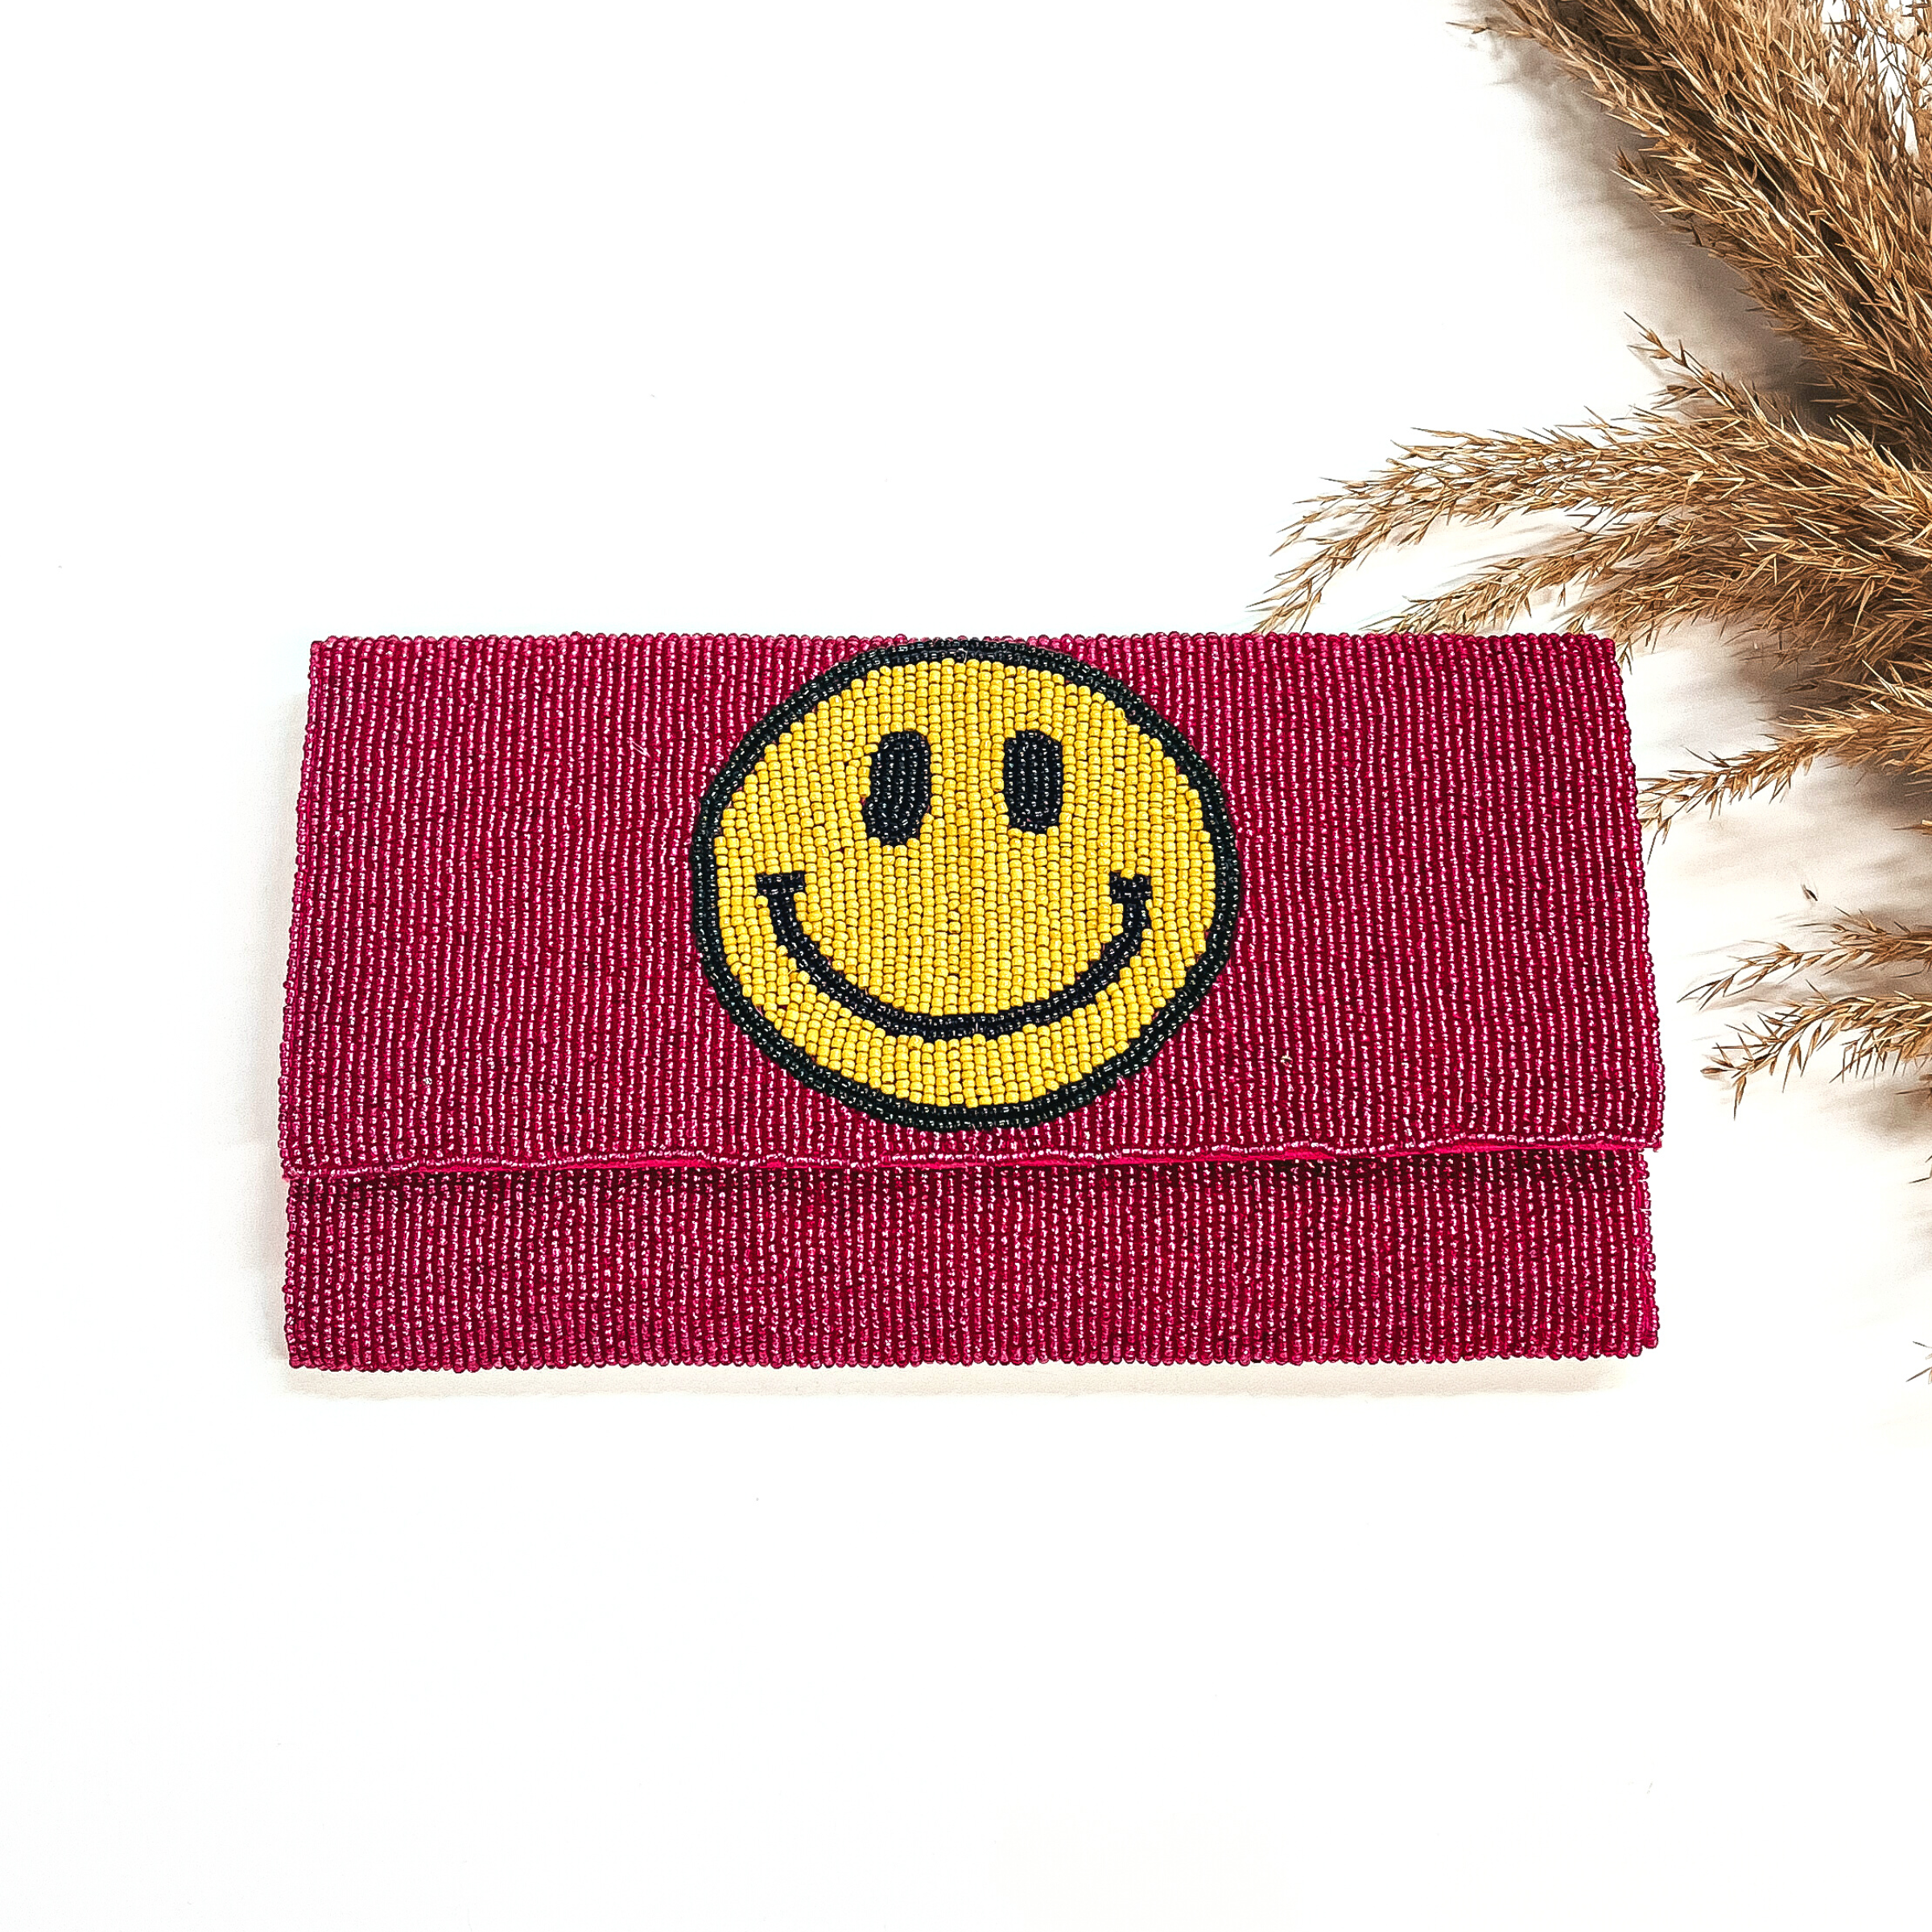 This is a seedbeaded clutch purse in fuchsia with a yellow happy face.This bag  is taken laying on a white background with a brown plant in the side as decor.